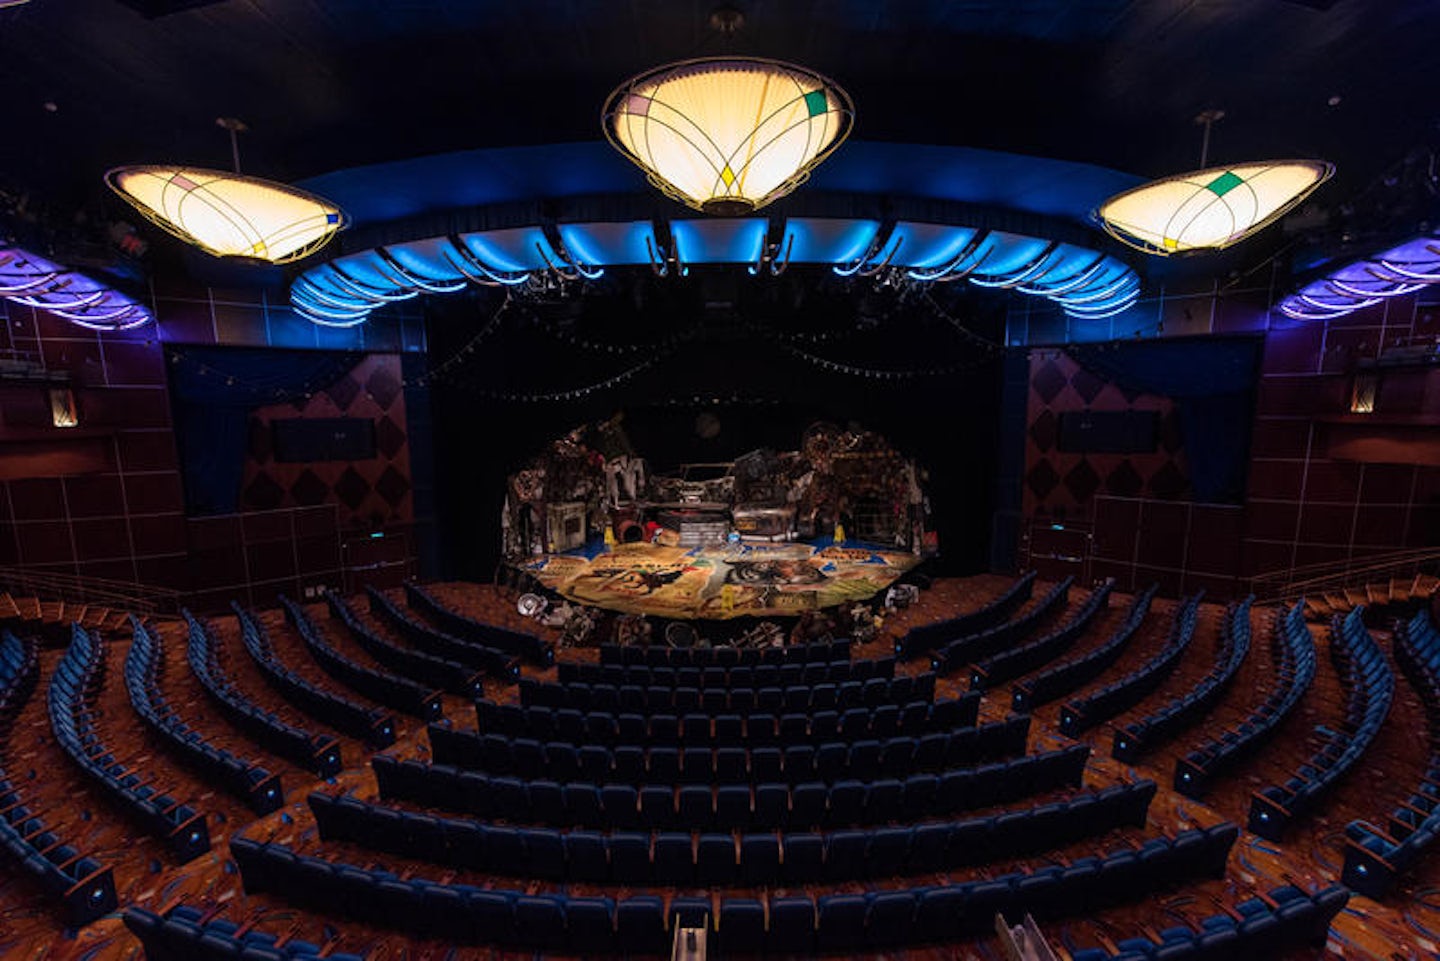 Opal Theater on Oasis of the Seas